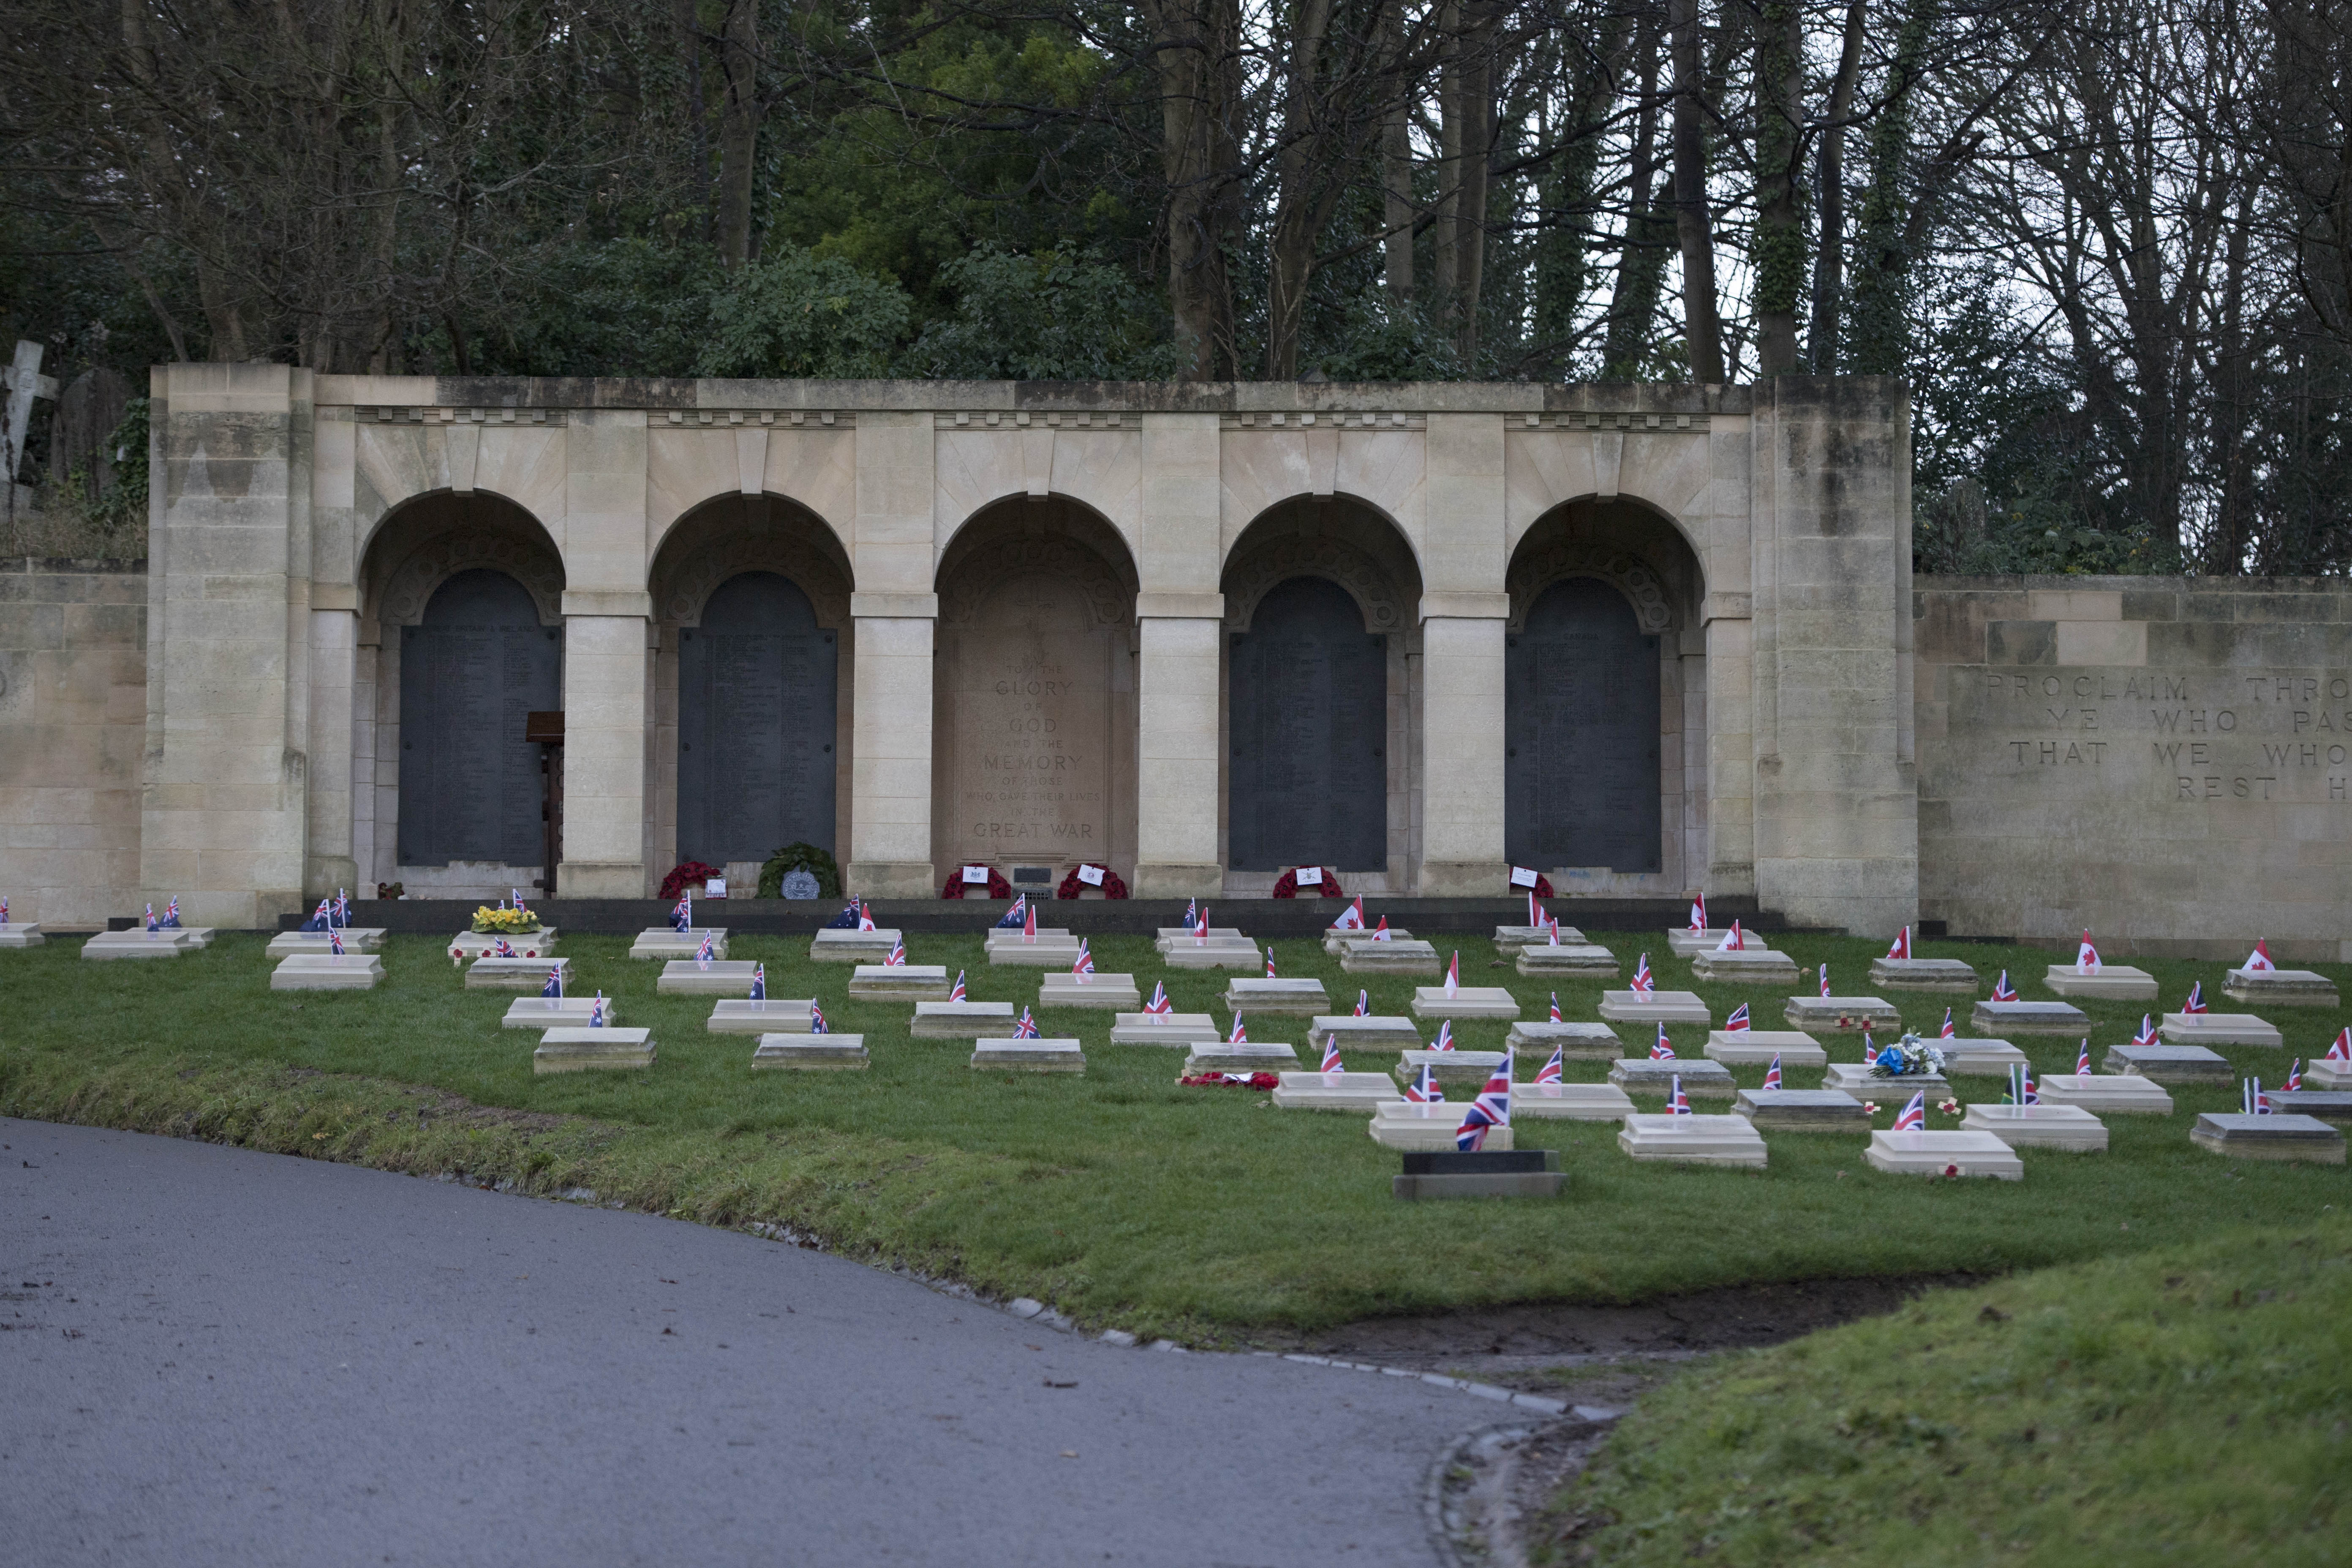 Commonwealth War Graves Commission